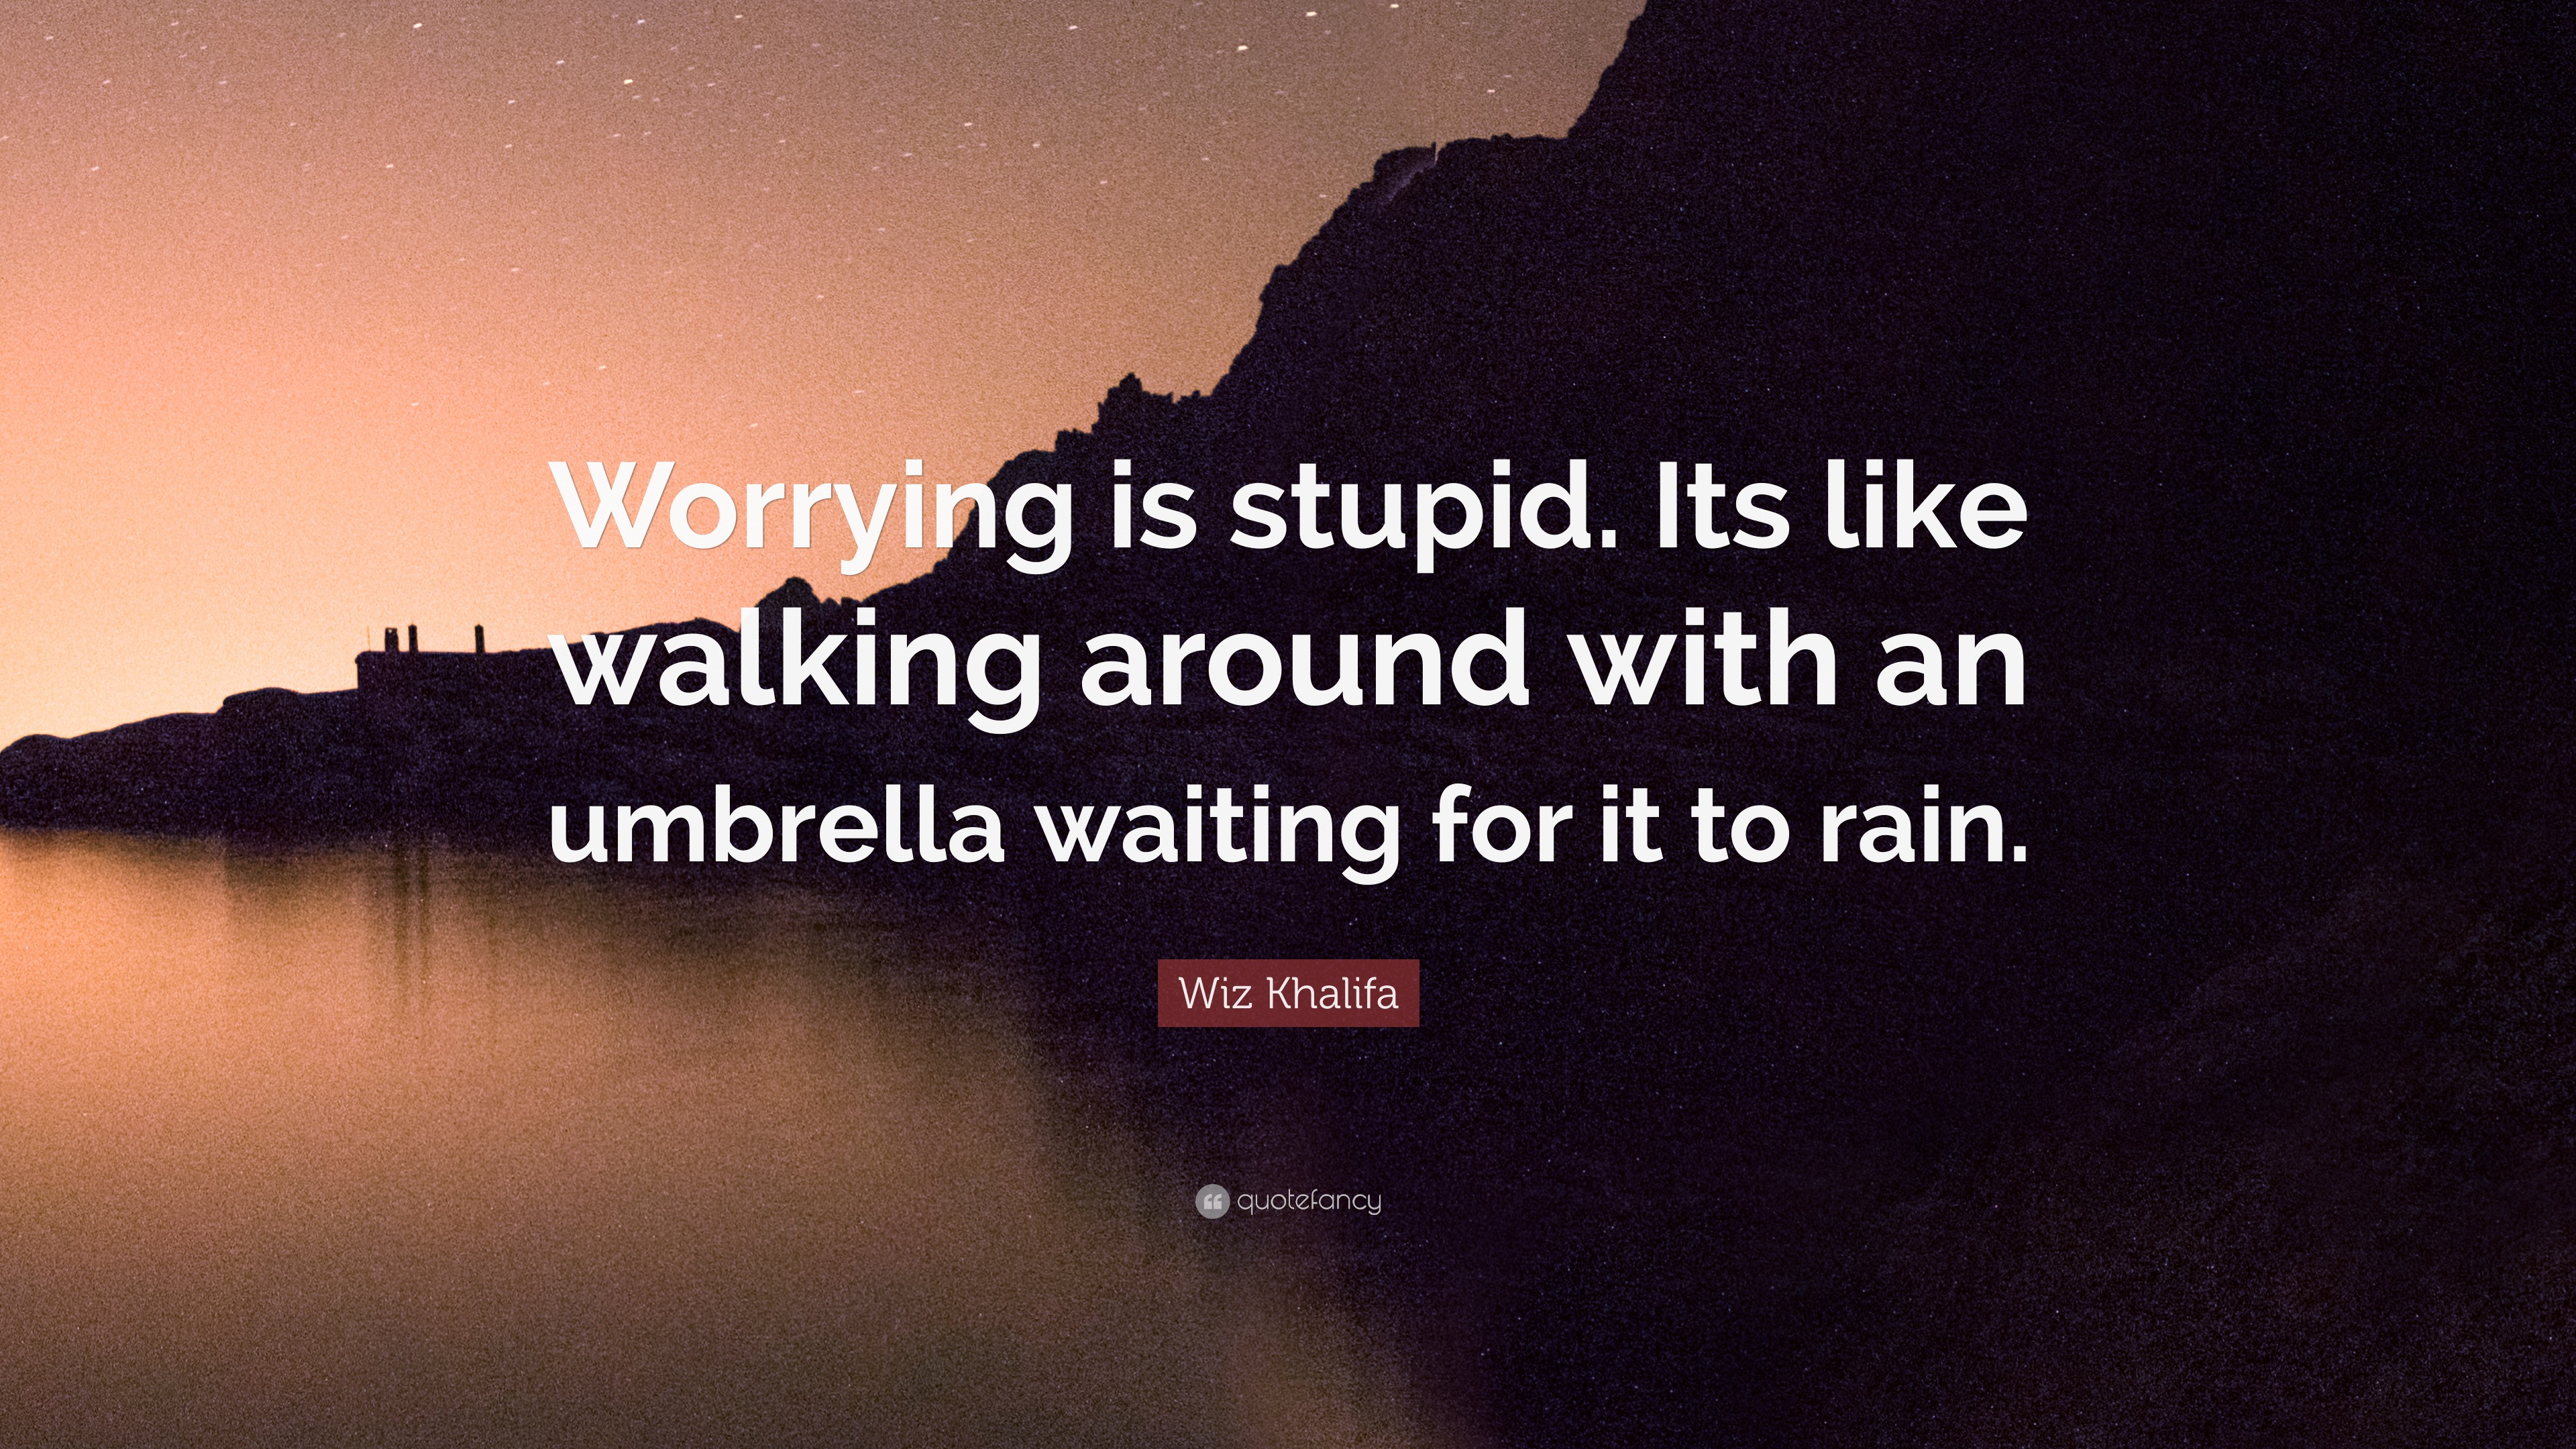 Wiz Khalifa Quote “Worrying is stupid Its like walking around with an umbrella